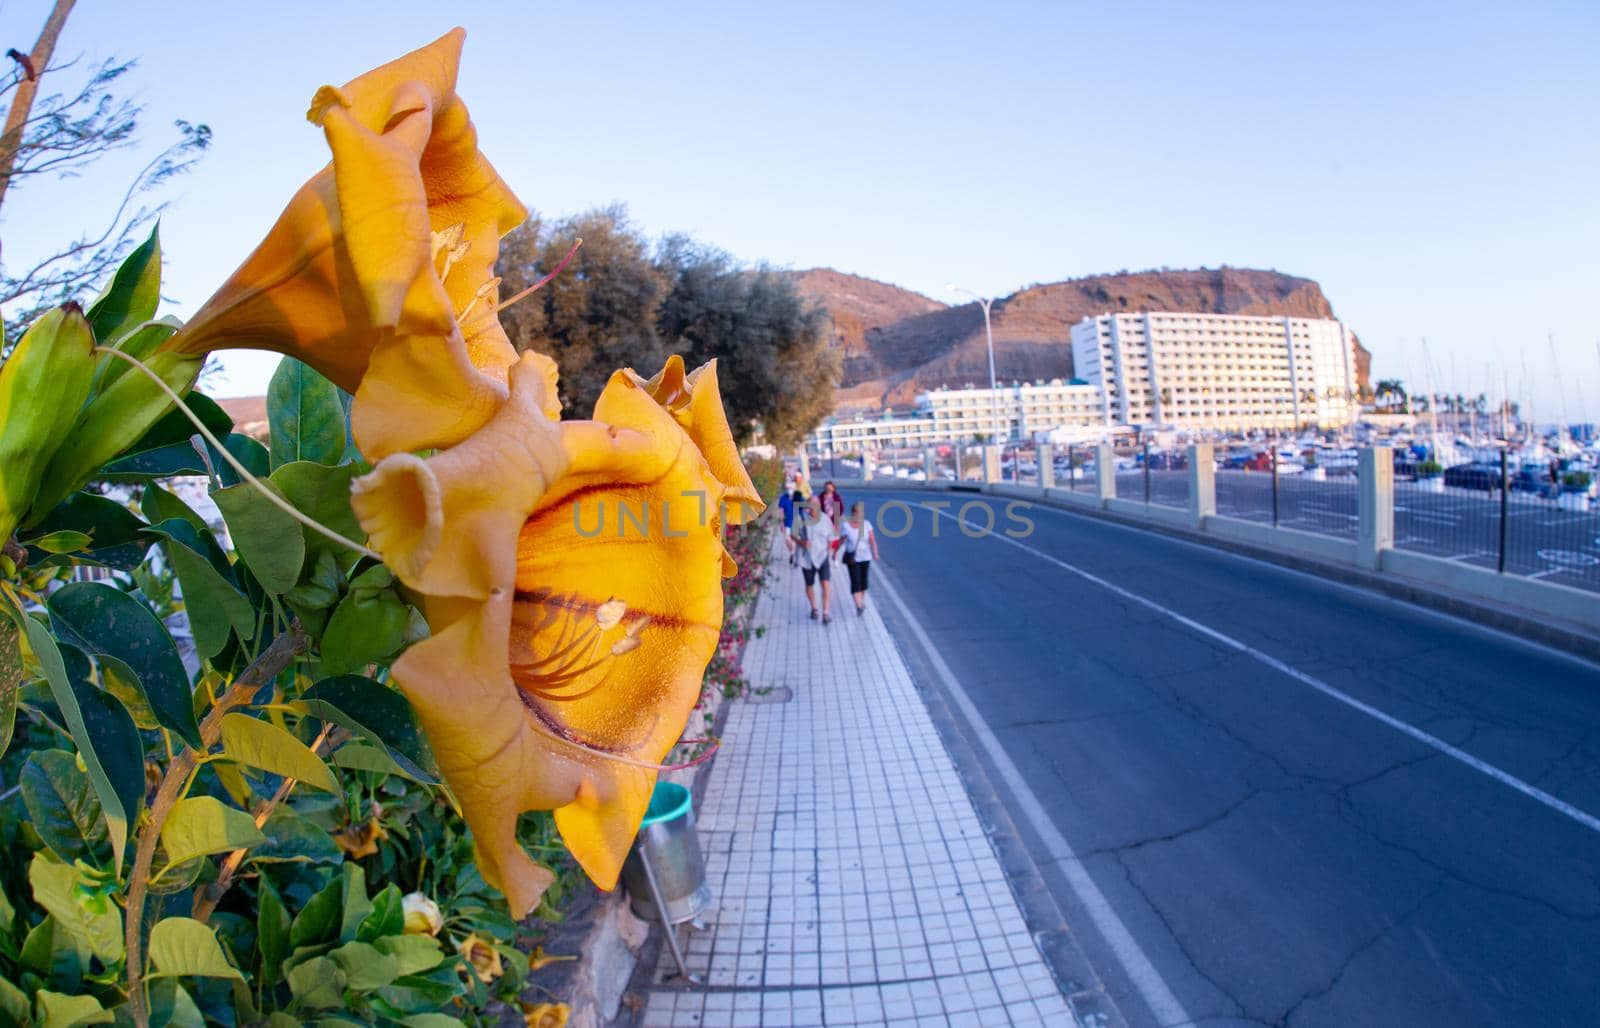 February 02 2022-Various bright yellow tropical flowers are found on the streets of Puerto Rico's Grand Canary